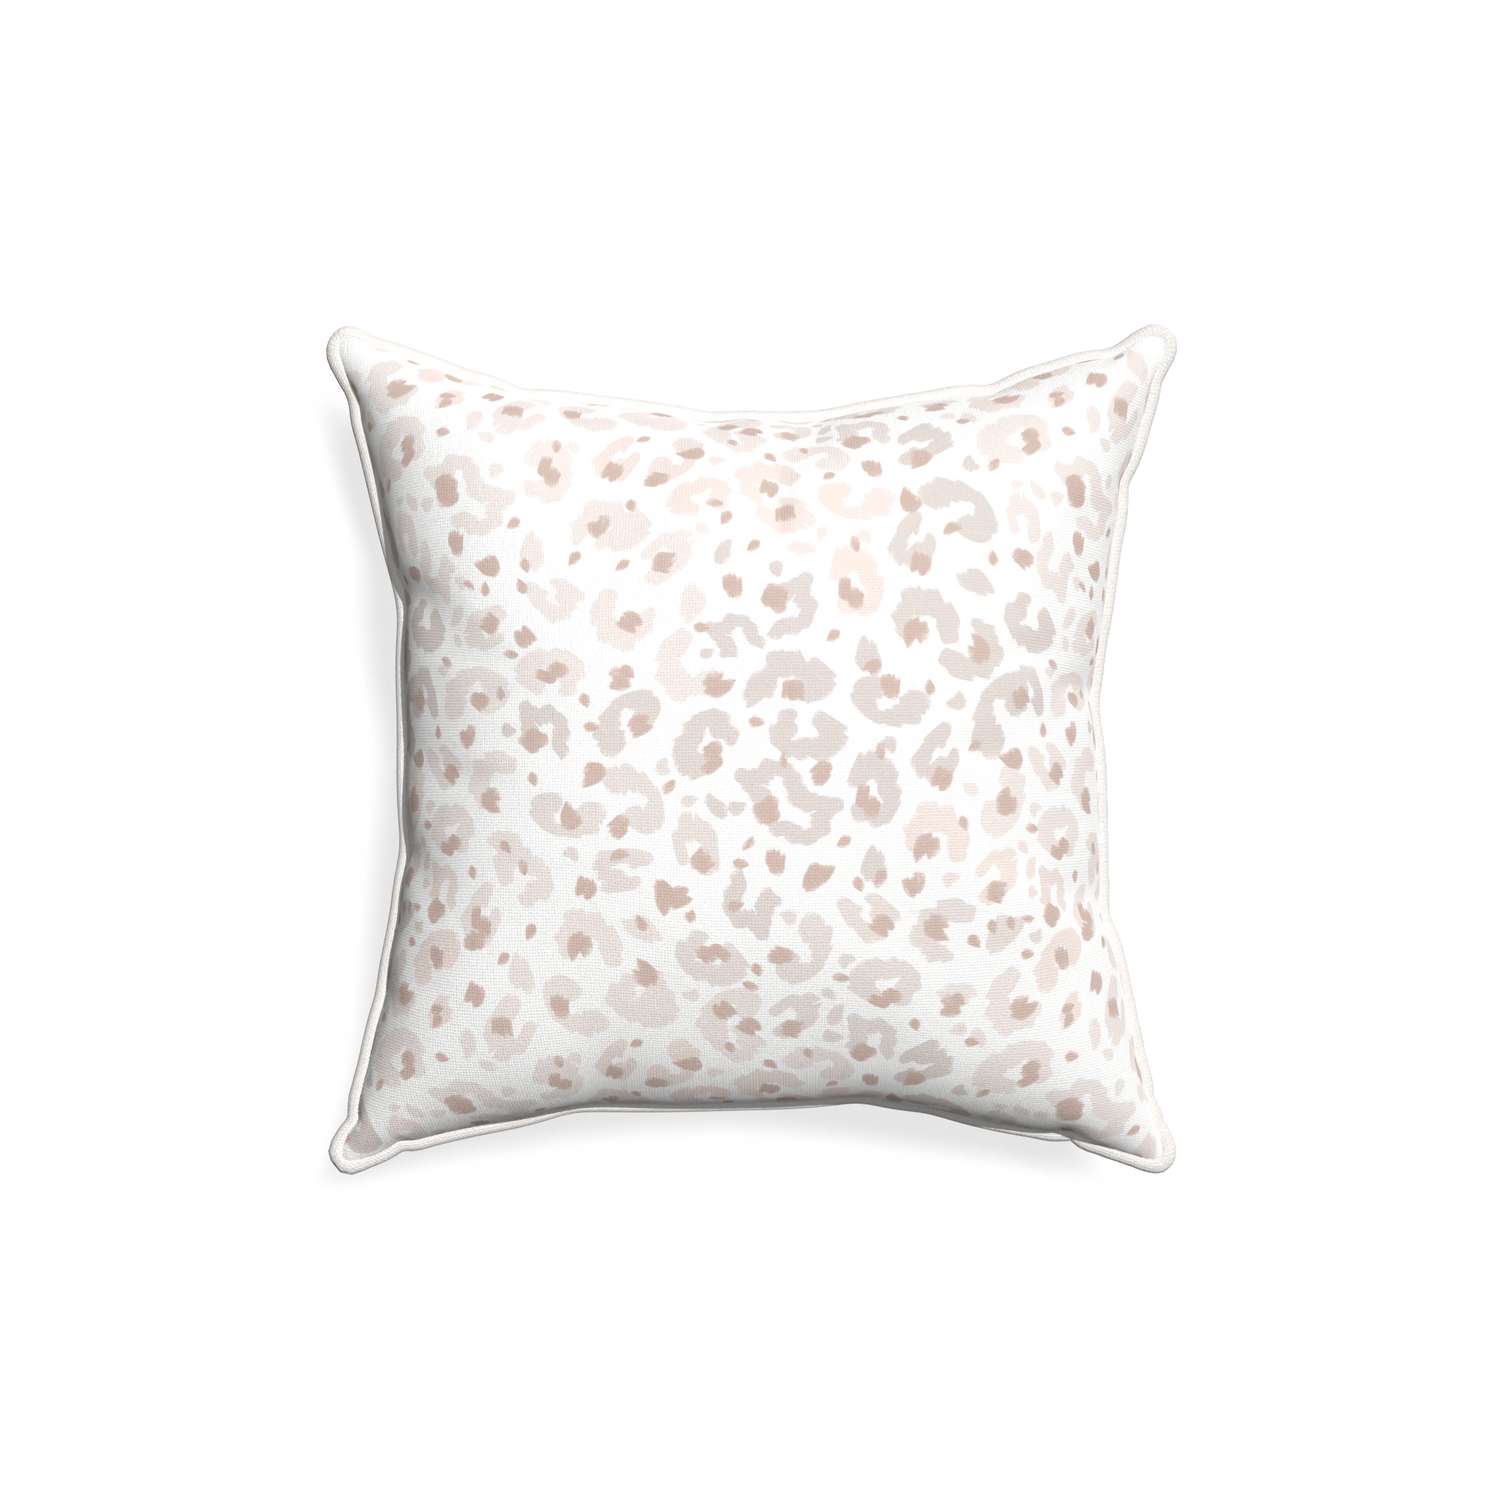 18-square rosie custom beige animal printpillow with snow piping on white background